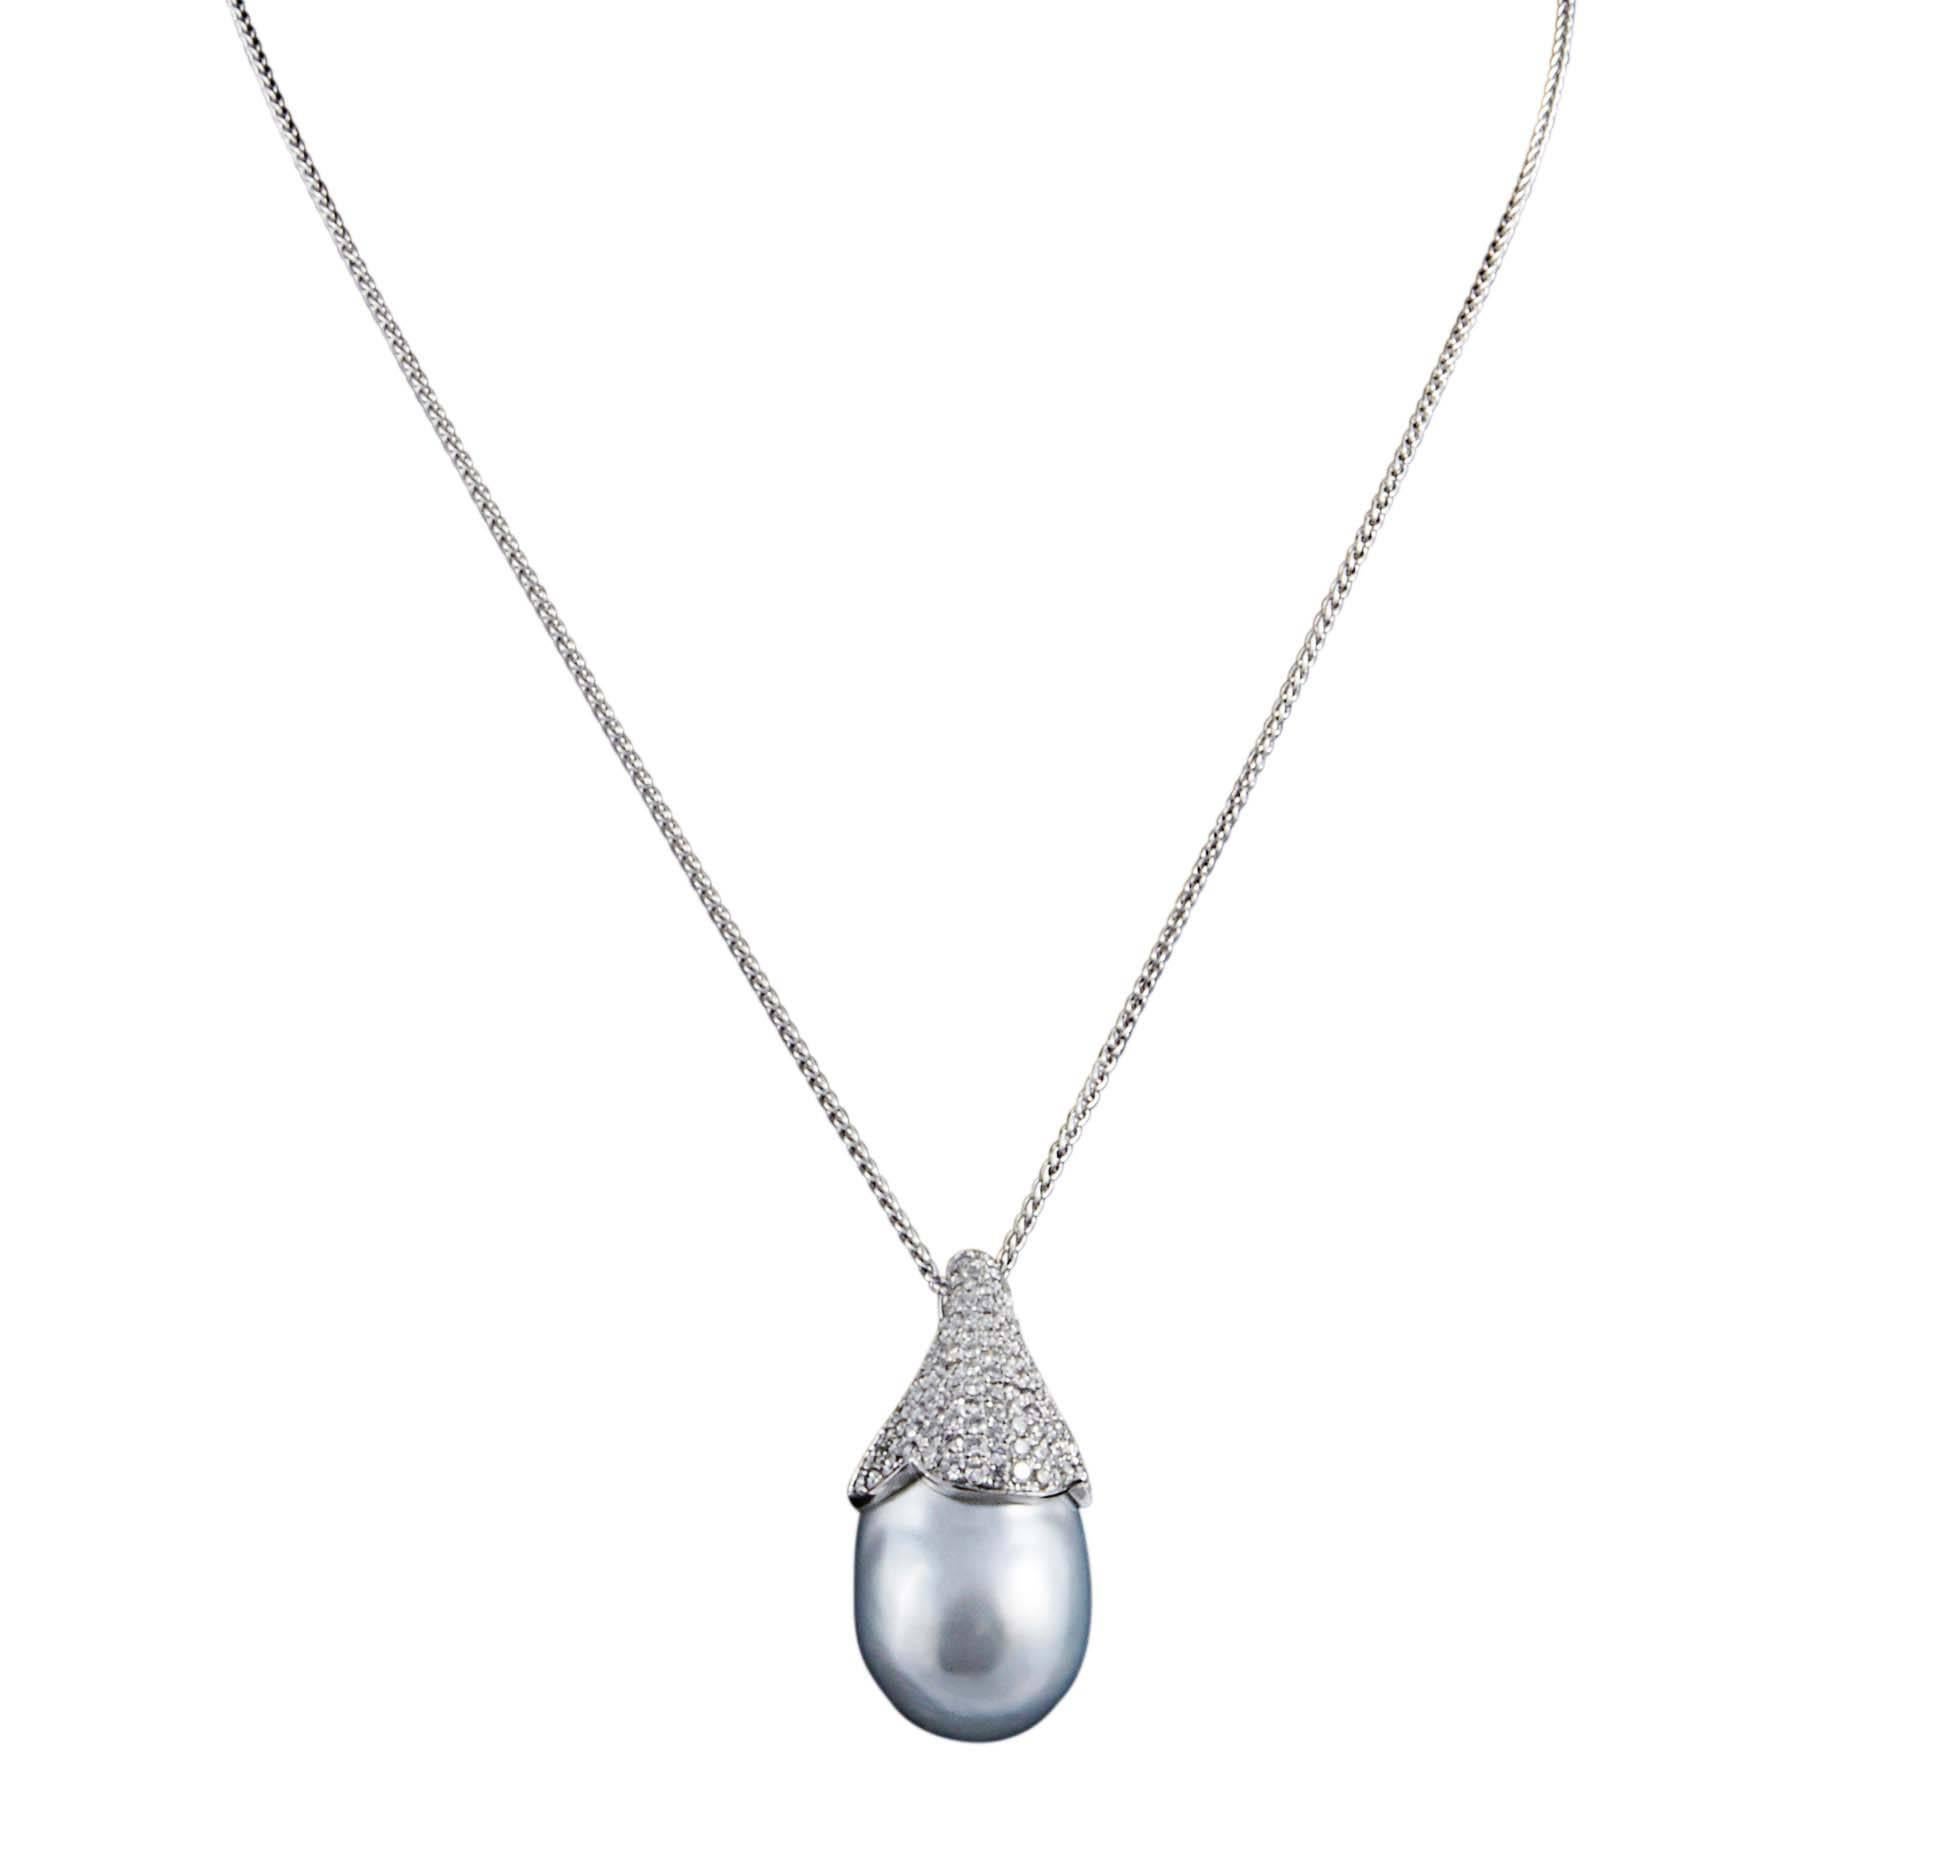 18K White Gold

South Sea Baroque Pendant 15 + mm
Total Diamond Weight: 0.89 Cts.

The Pearl is white with a silver overtone.
Natural blemishes on the pearl